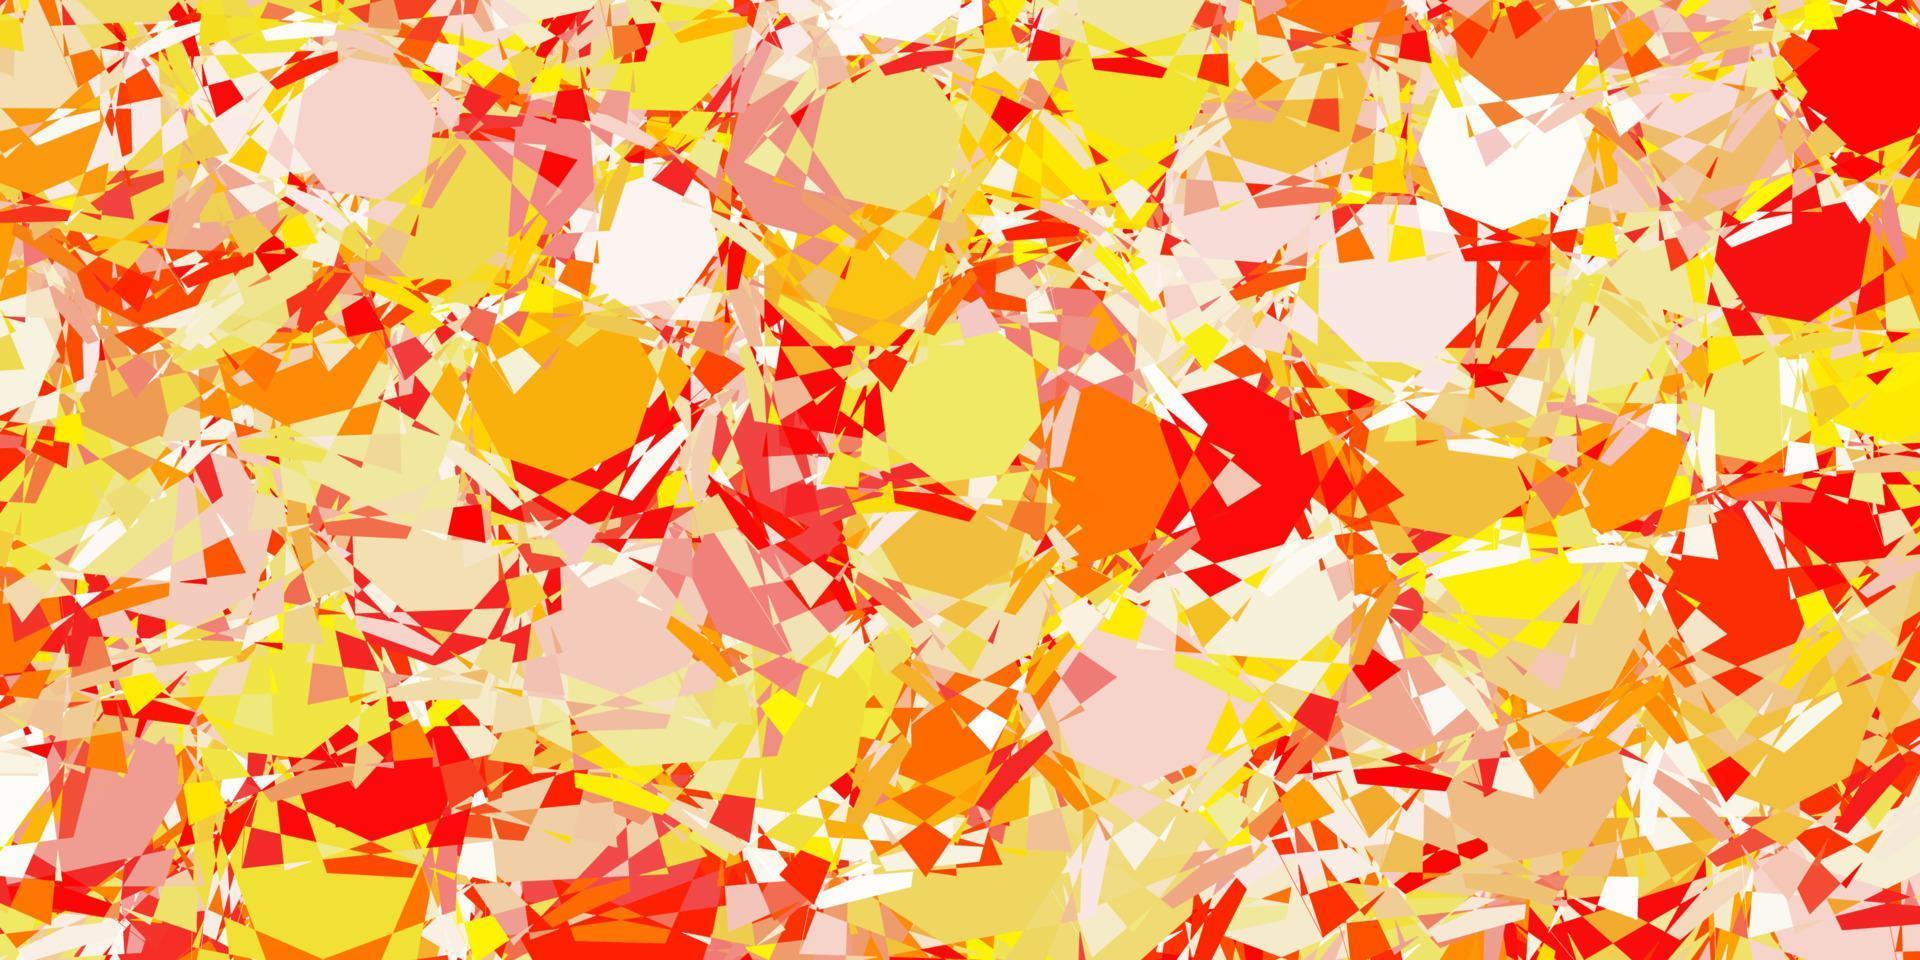 Light Orange vector pattern with polygonal shapes.